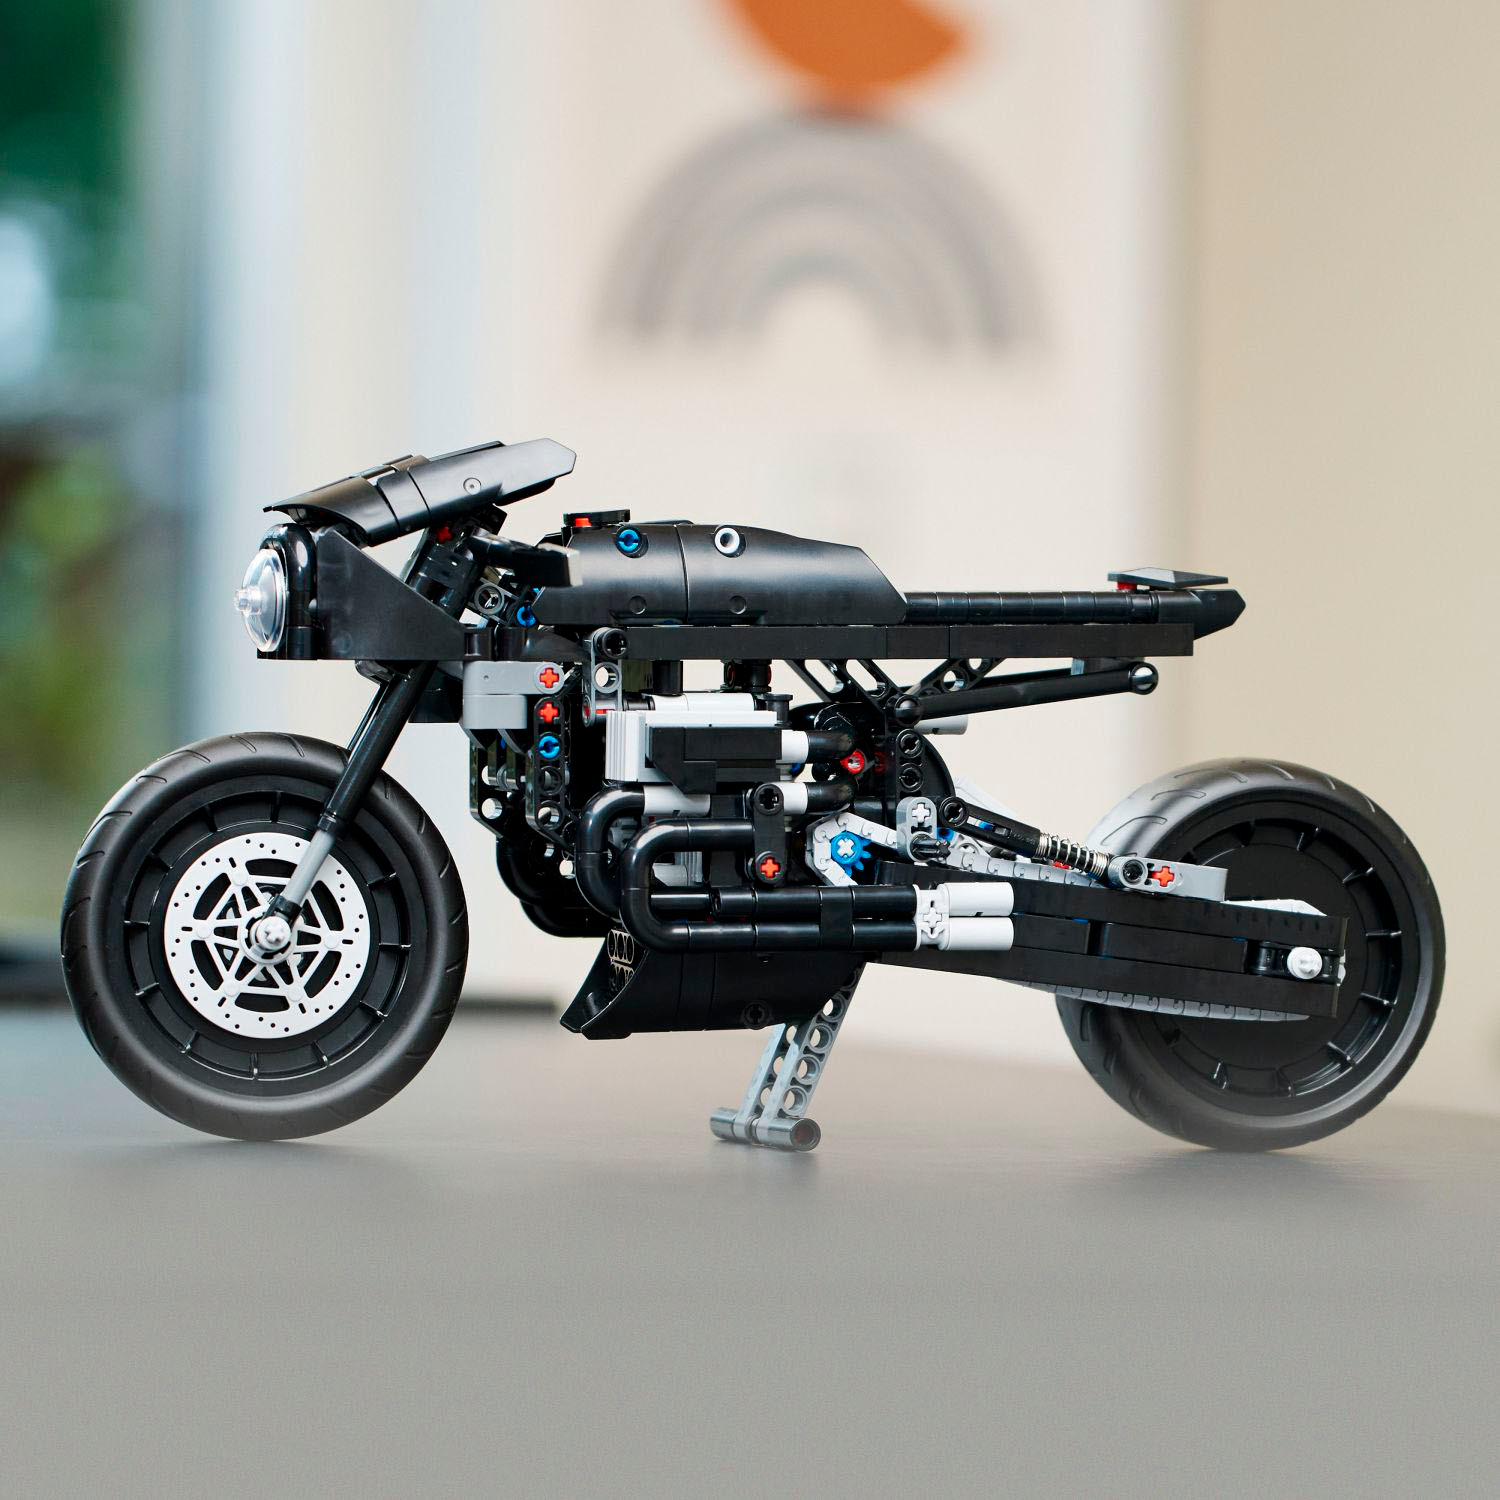 There's Now a Lego Technic Set of BMW's First M-Badge Motorcycle